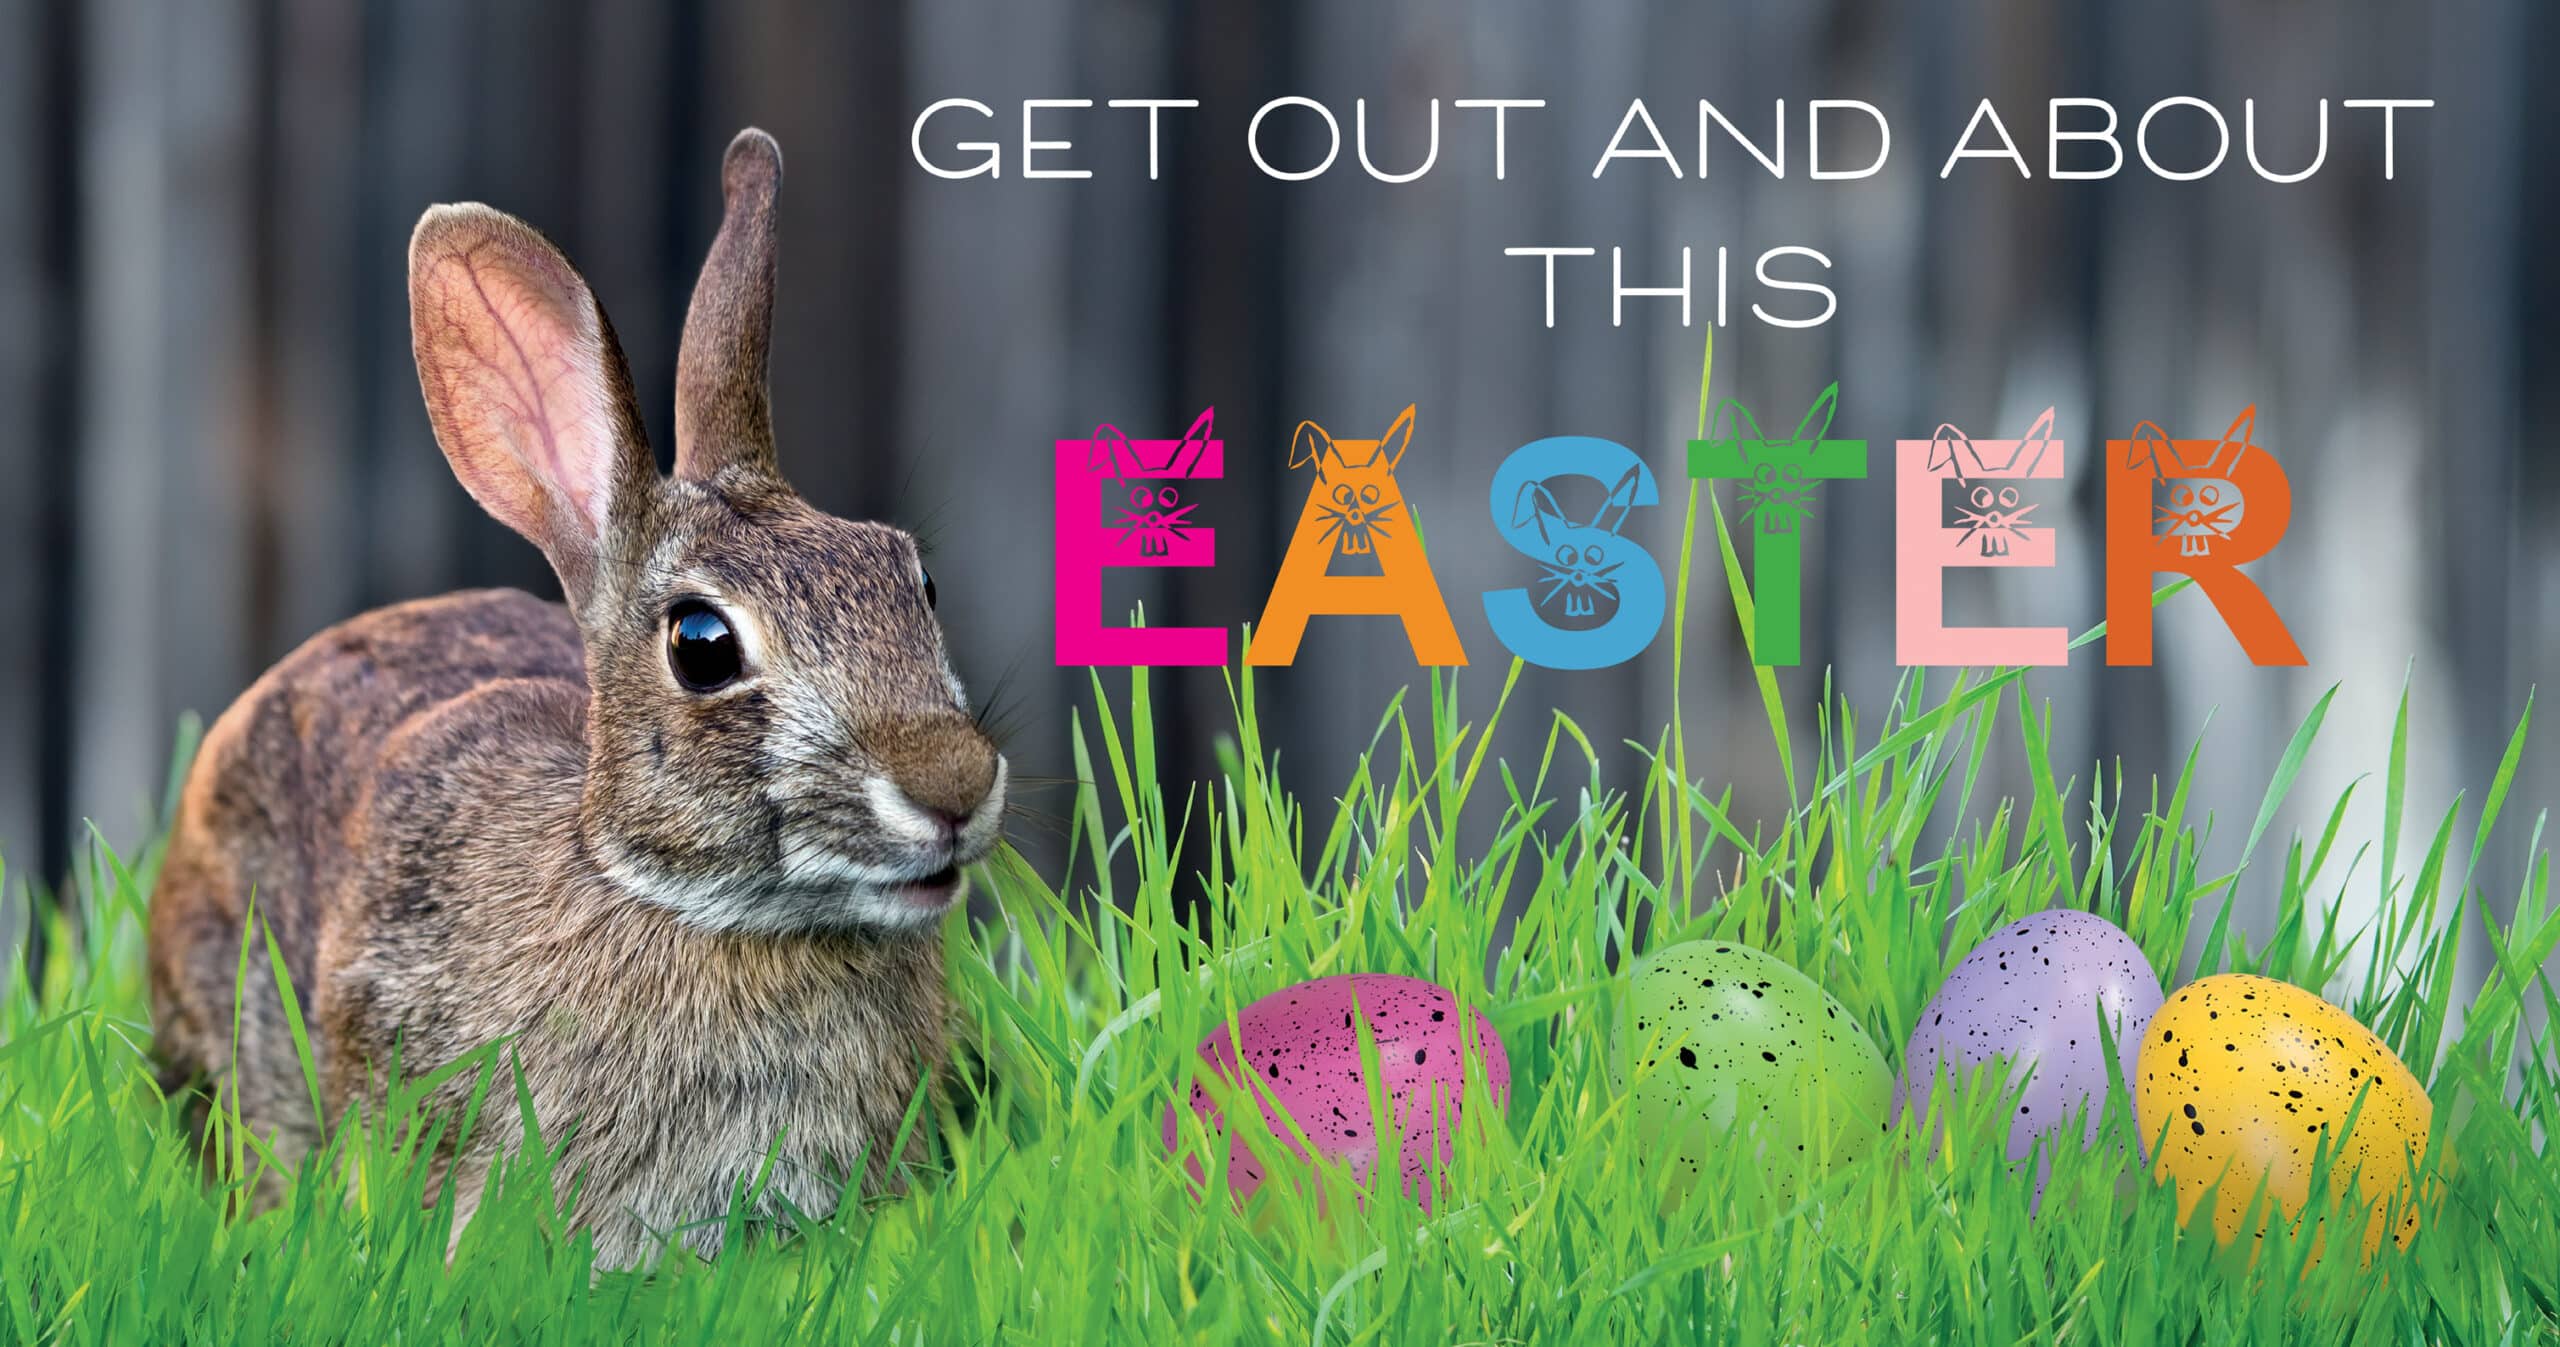 Get out and about this easter